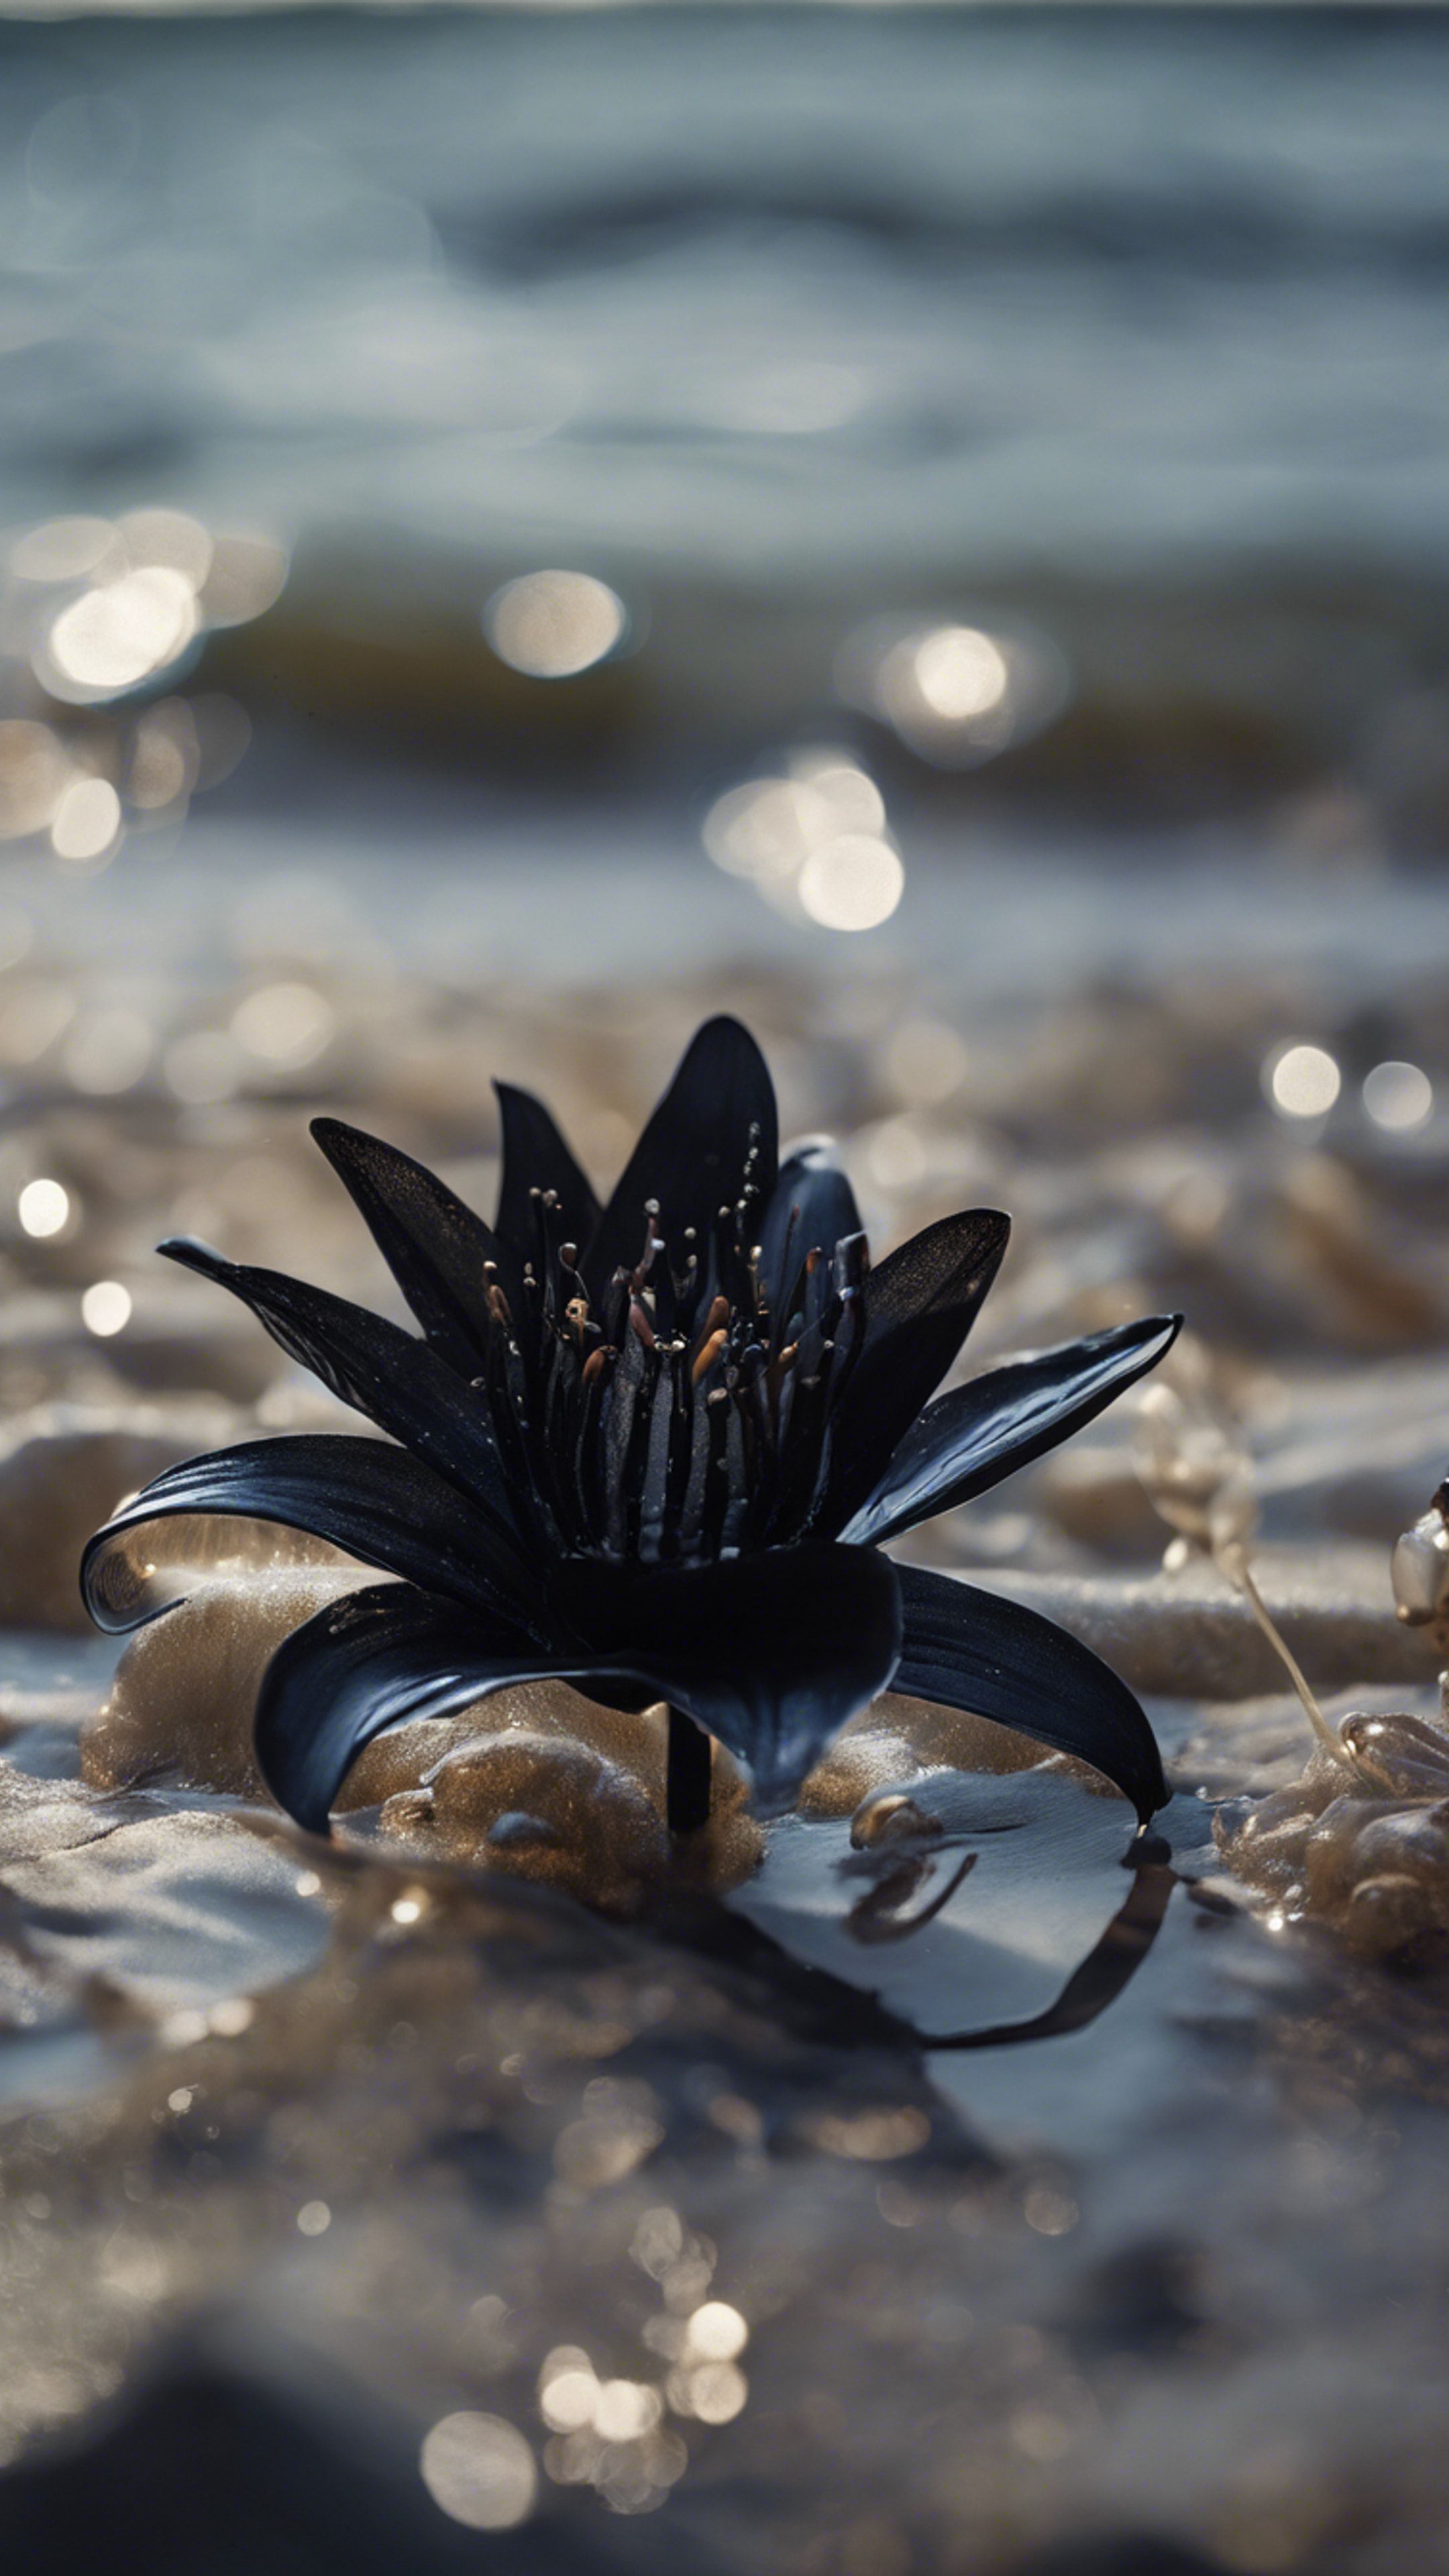 A black lily hiding under the tide, revealed only when the ocean pulls away, revealing the dark secrets of the sea bed. کاغذ دیواری[3833c30c18c941348380]